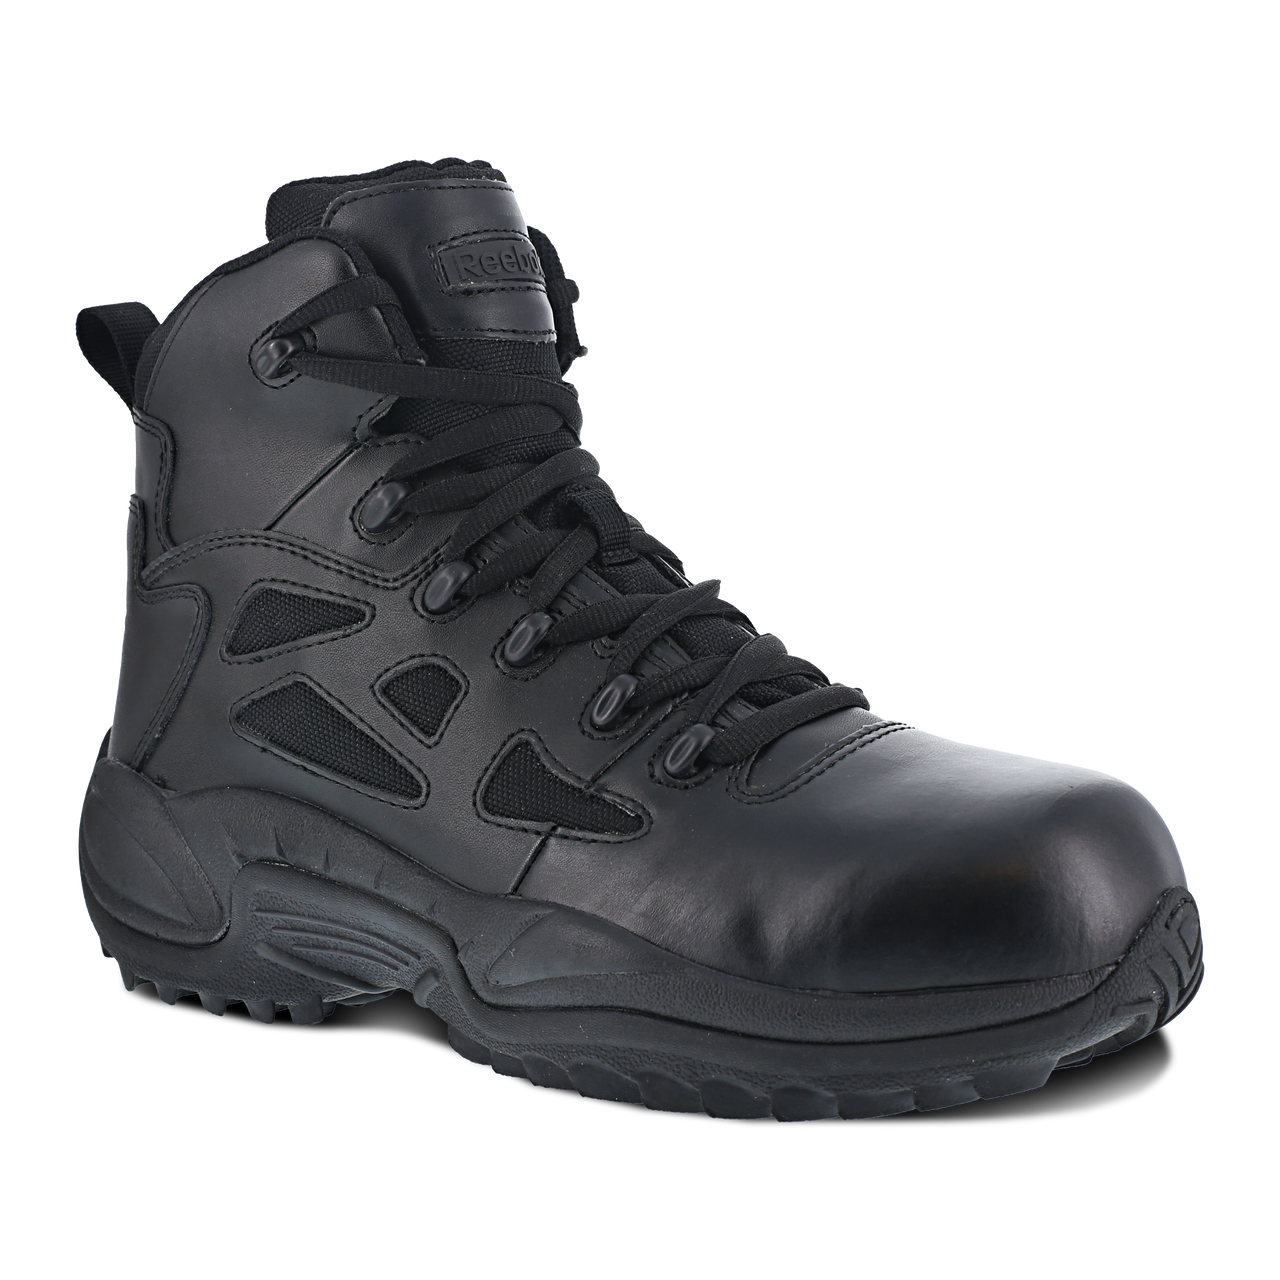 Reebok Rapid Response 6" Stealth Boots with Side Zipper - RB8674